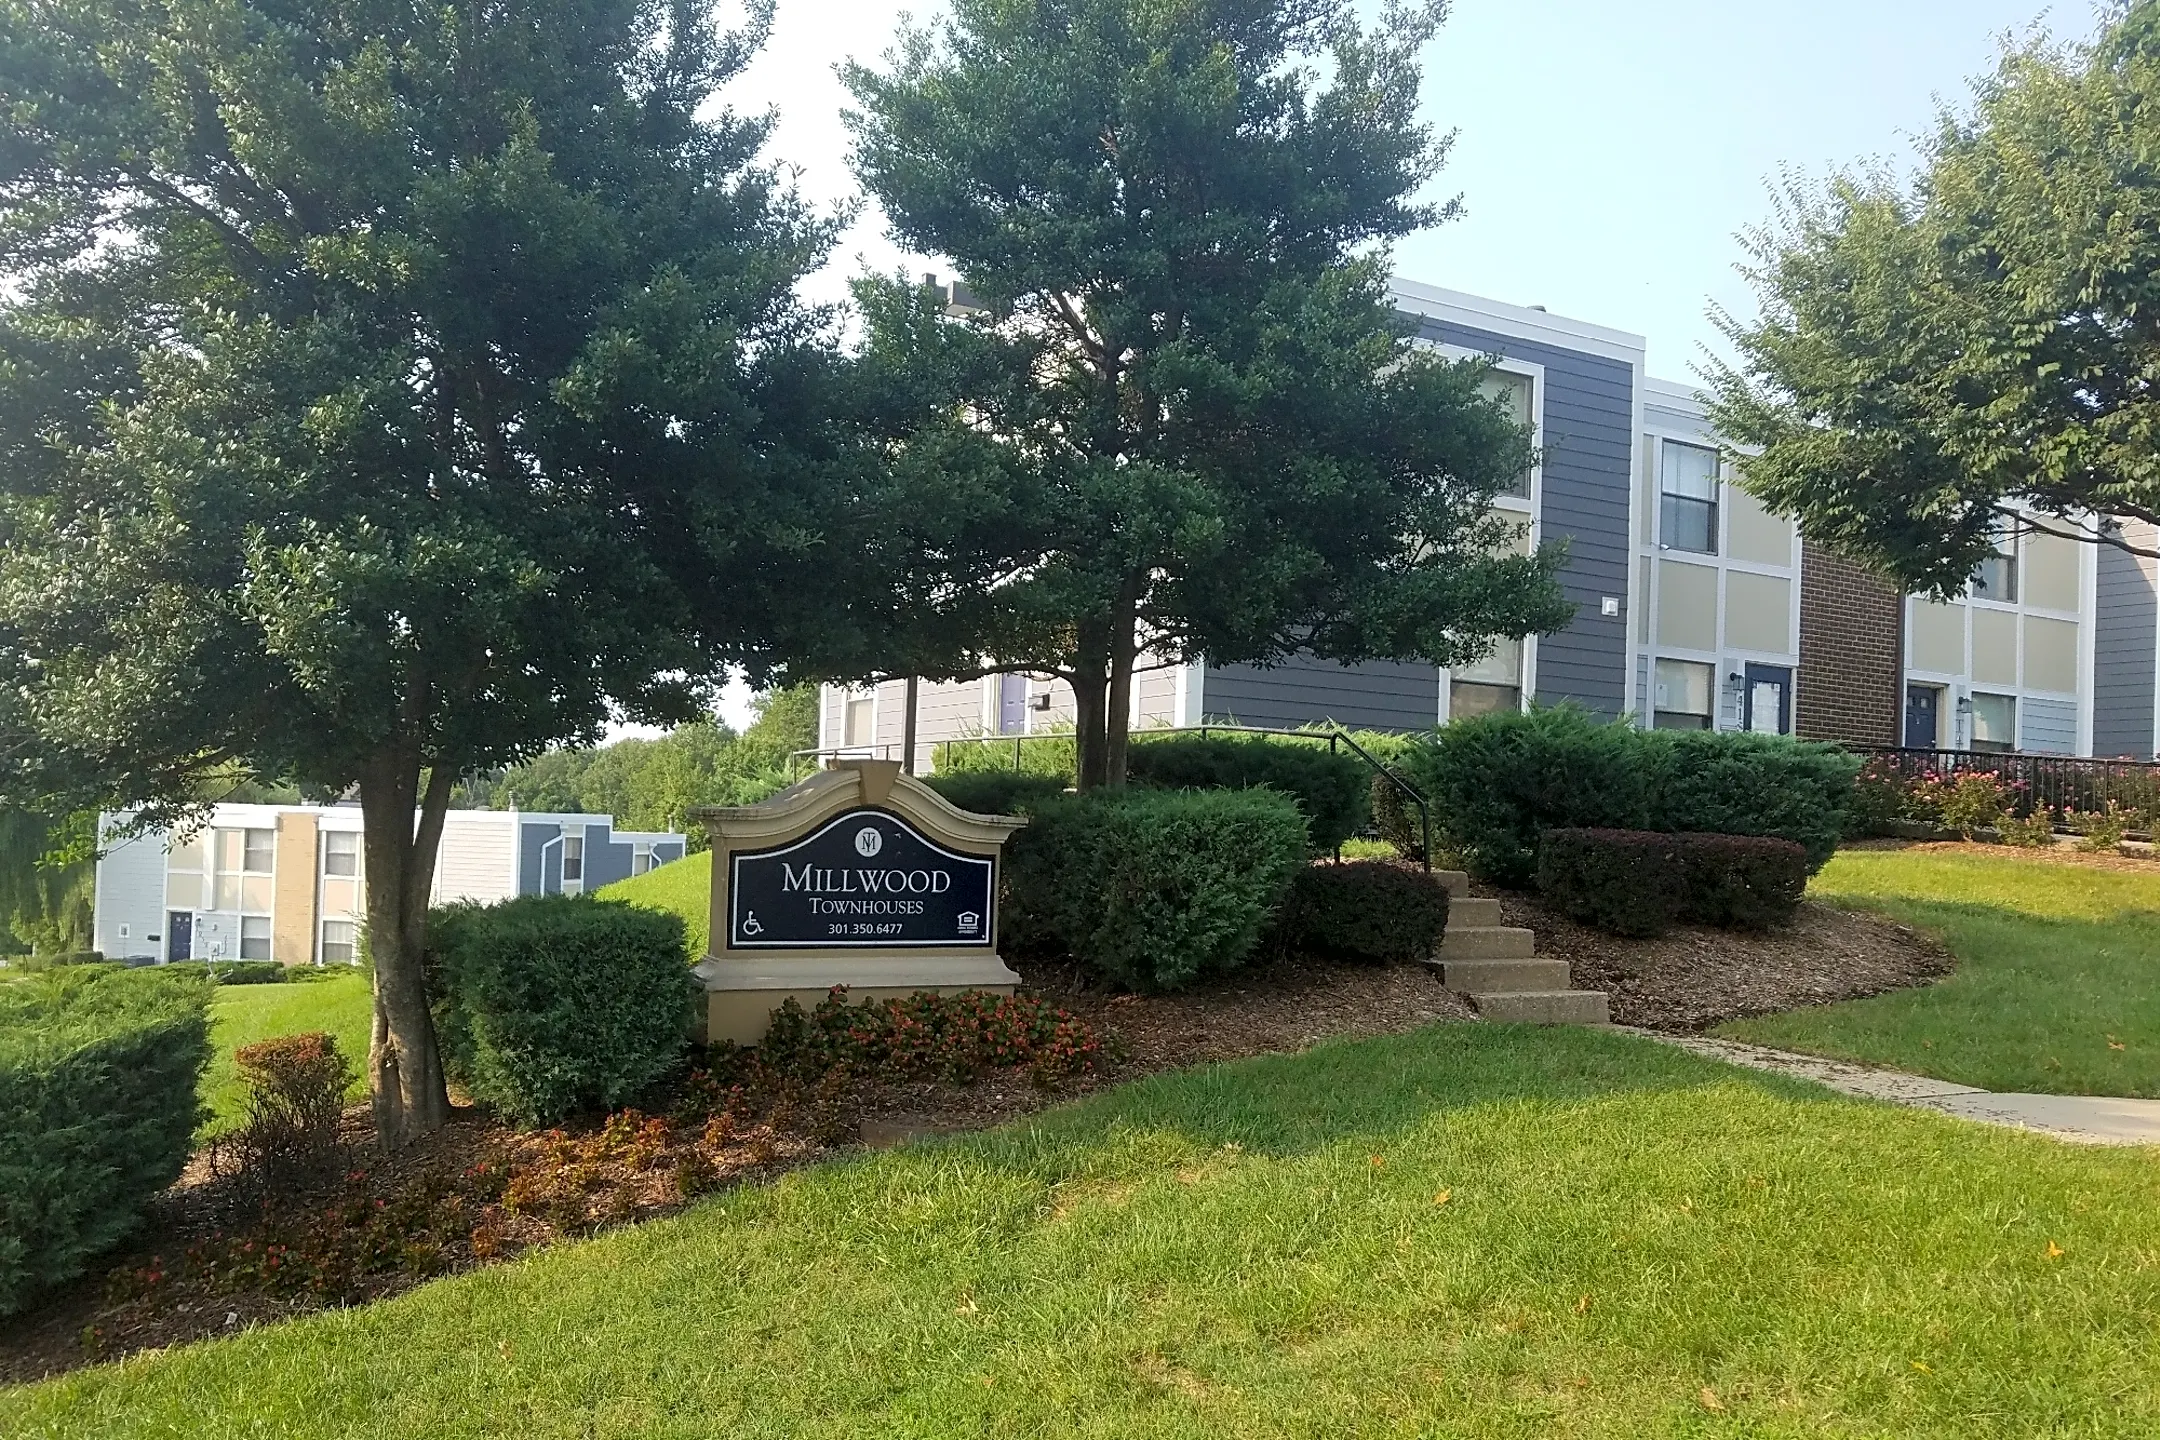 Pool - Millwood Townhouses - Capitol Heights, MD